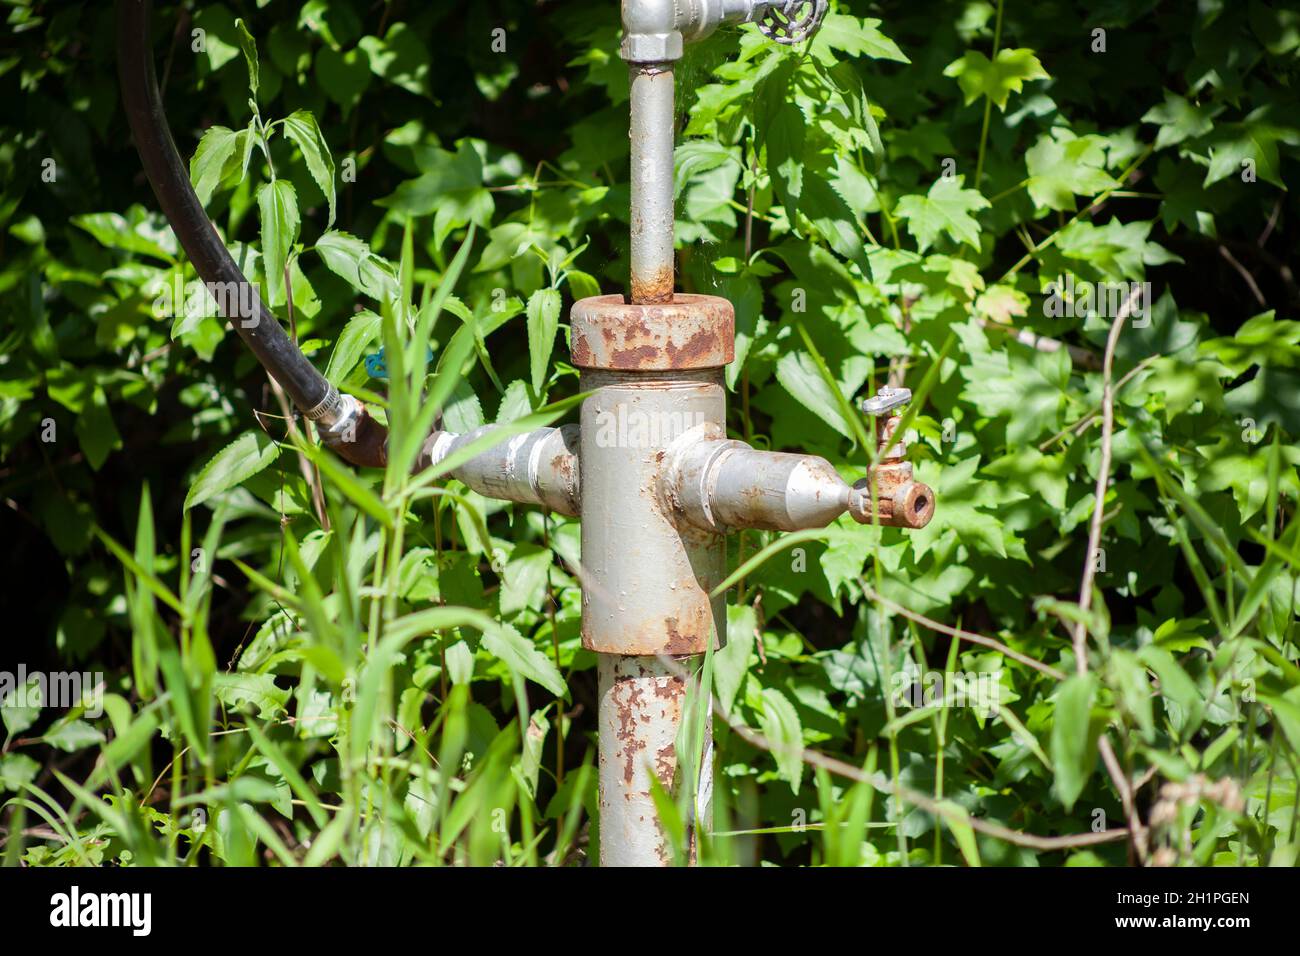 Metal water spigot located in deep green foliage Stock Photo